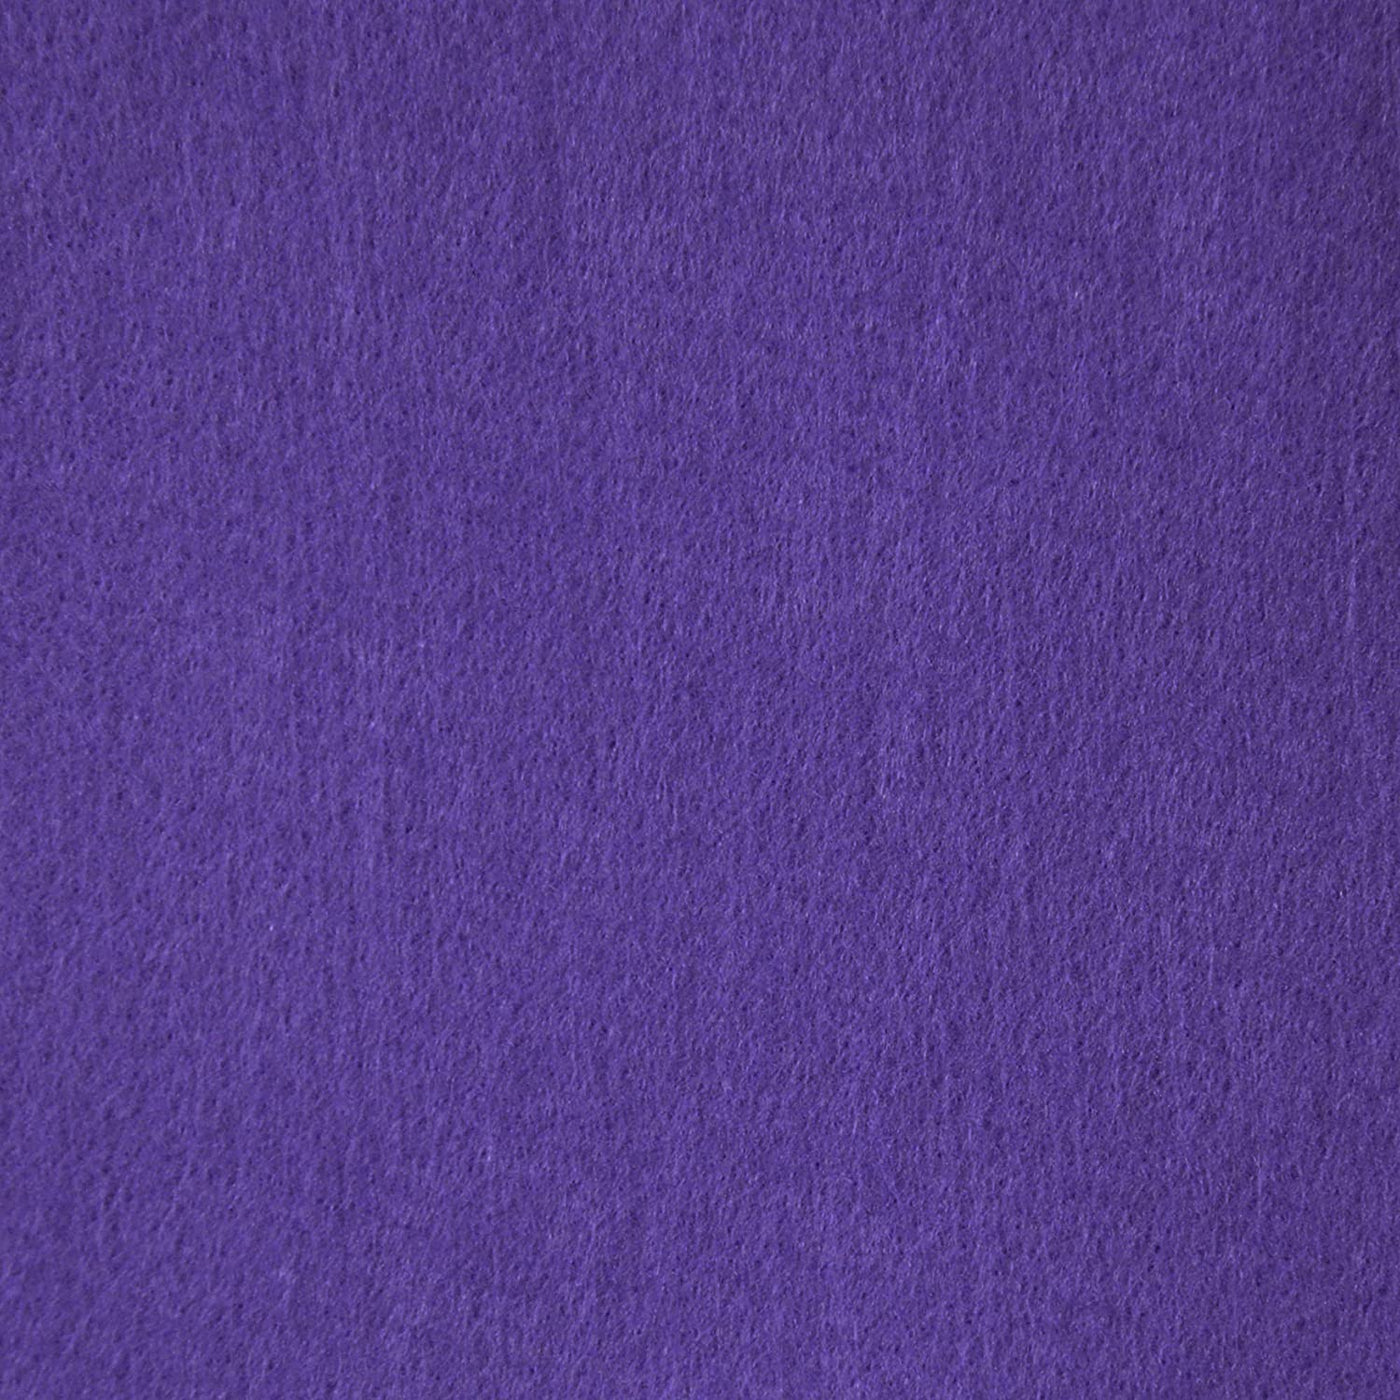 FabricLA | Acrylic Felt Craft Fabric by the Yard | 72" Inch Wide | 1.6mm Thick | Sewing, Cushion, Padding, and DIY, Arts & Crafts | Lavender | FabricLA.com